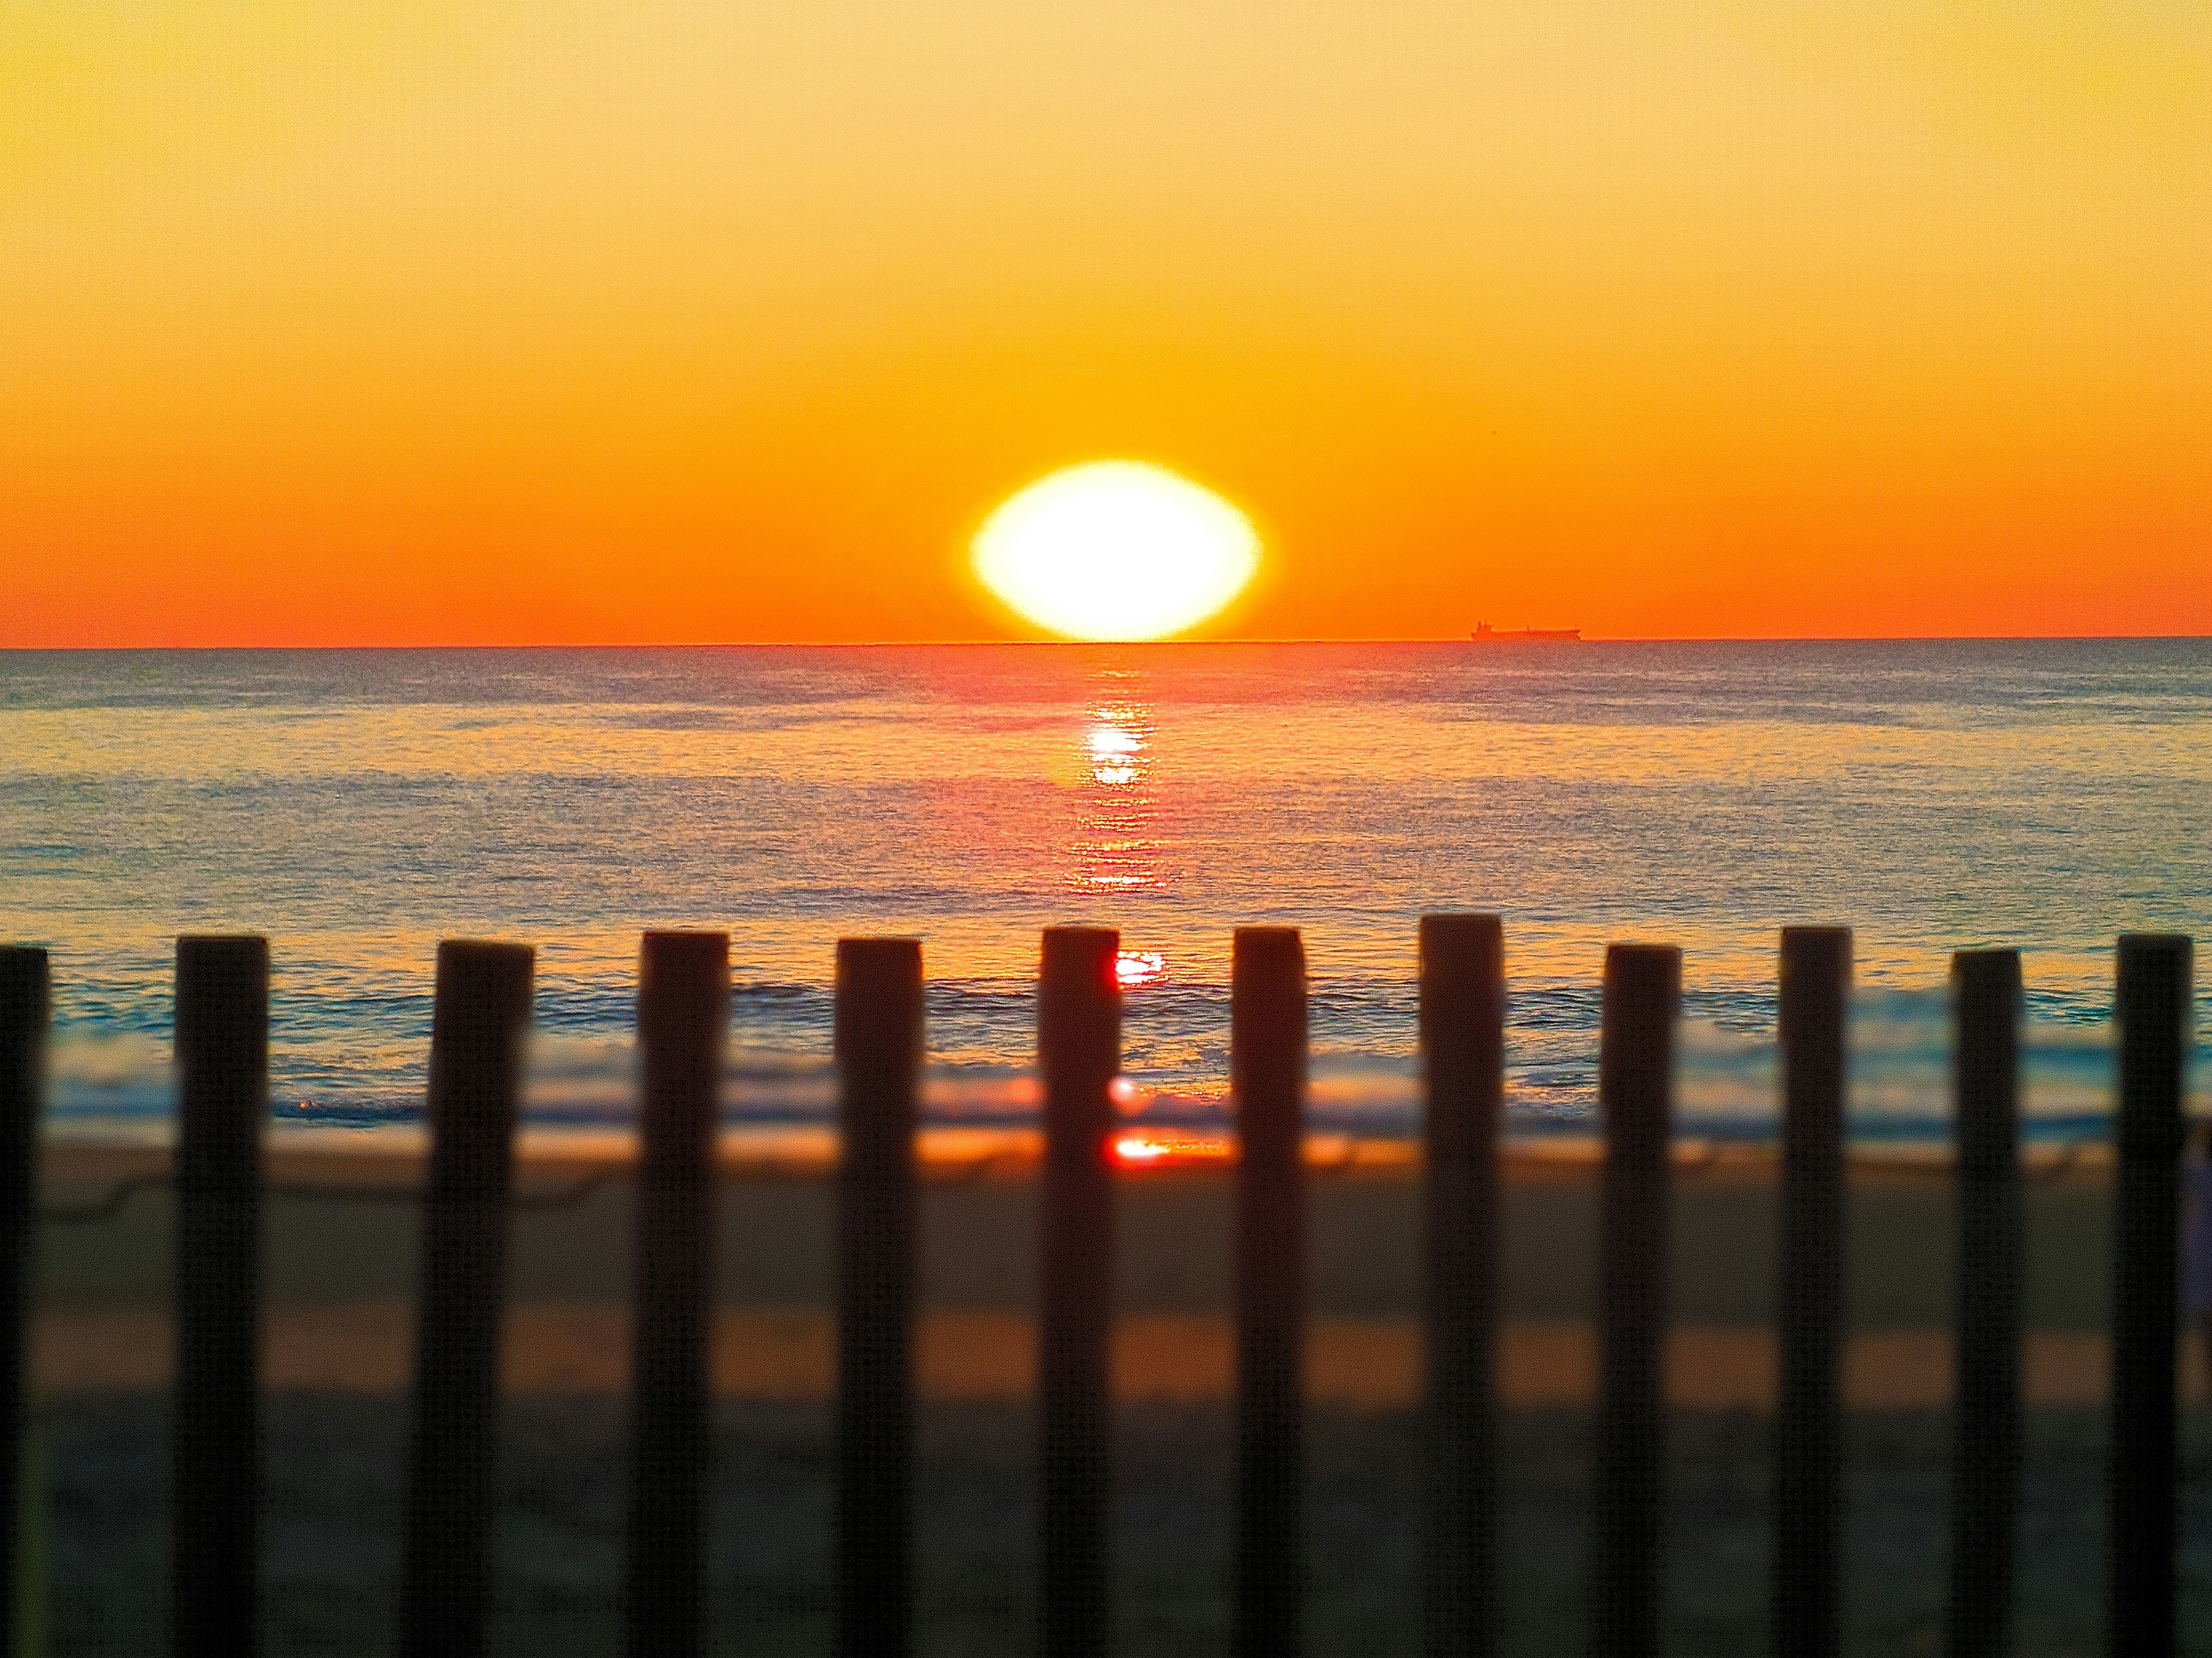 brown wooden fence on beach during sunset